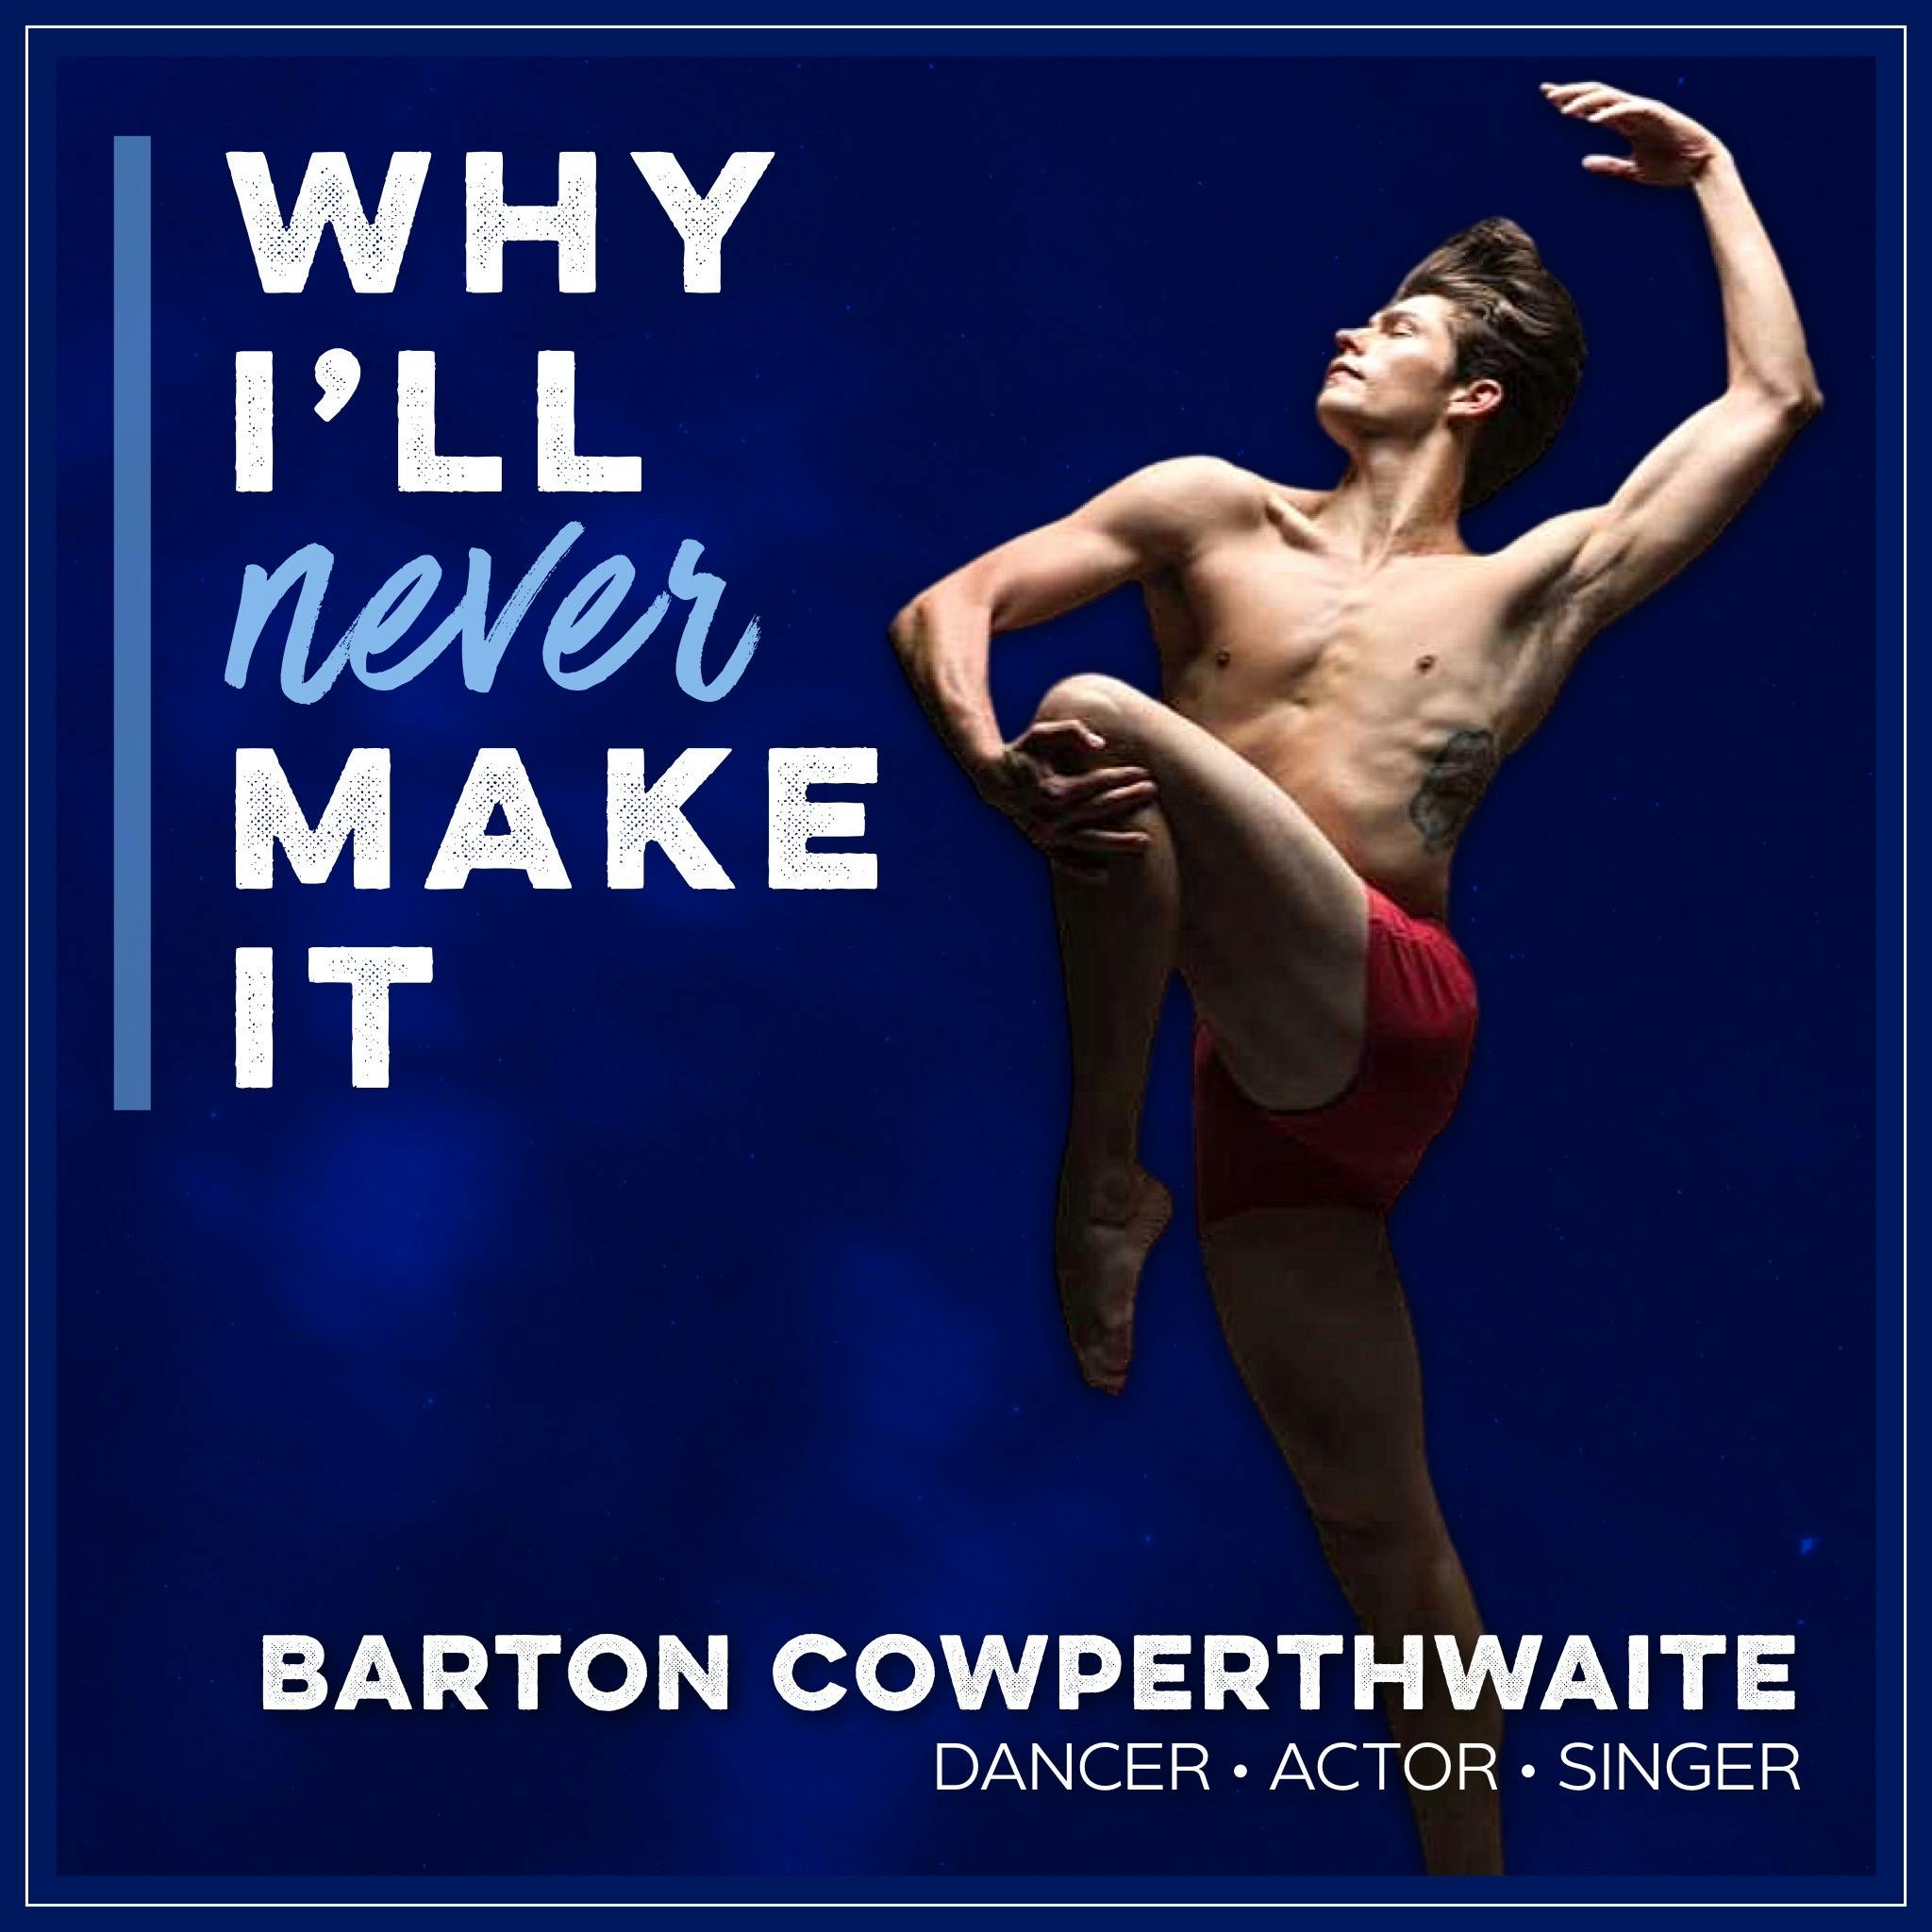 Barton Cowperthwaite from Tiny Pretty Things Discovers He’s More Than Just a Dancer